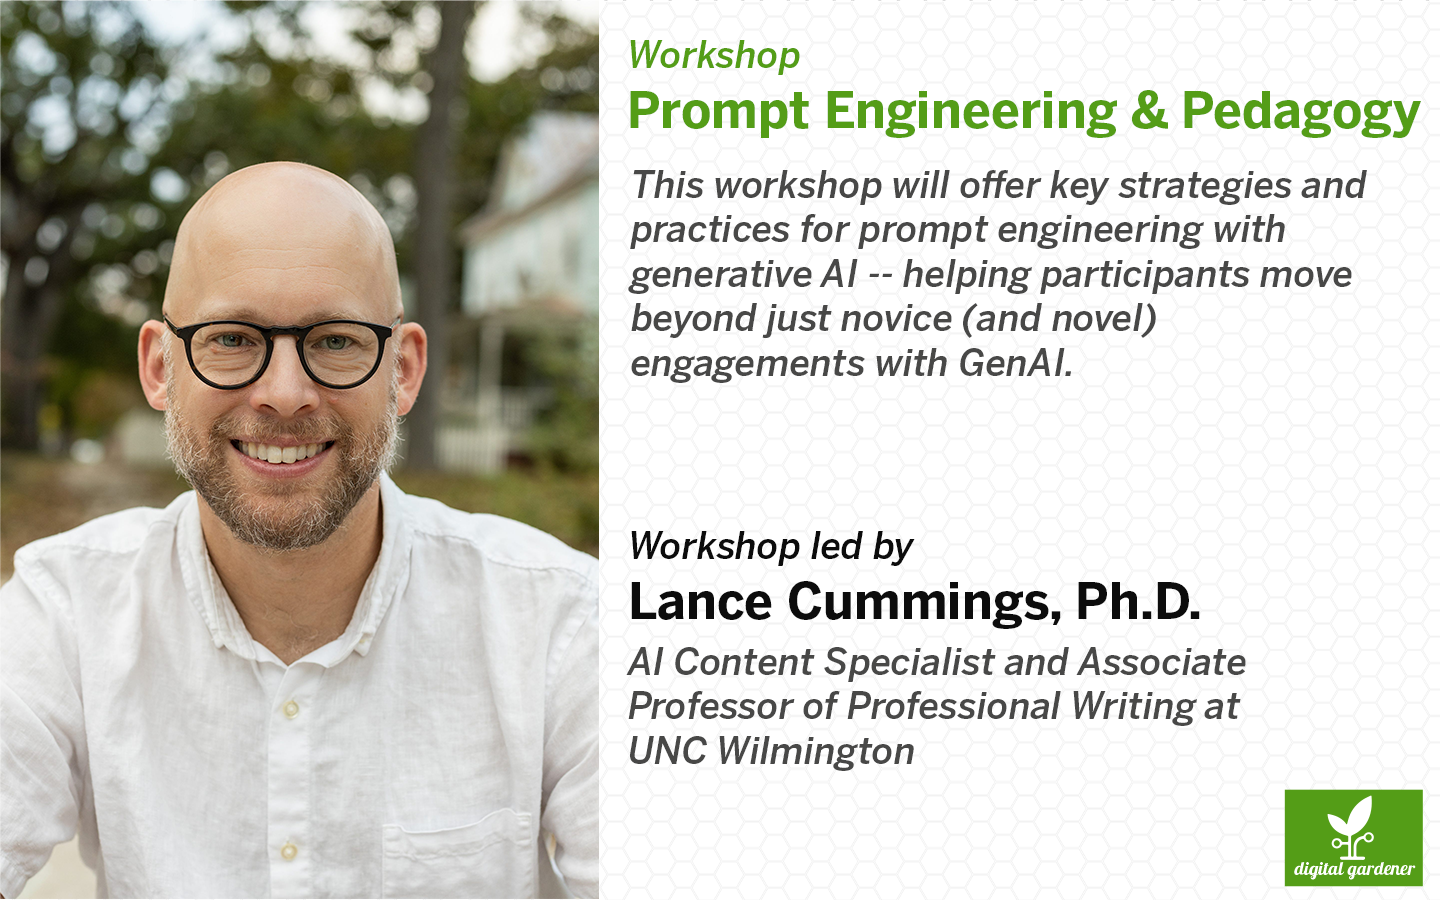 This is a promotional image for a Digital Gardener Summit workshop on prompt engineering and pedagogy, led by Lance Cummings, Associate Professor of Professional Writing at UNC Wilmington